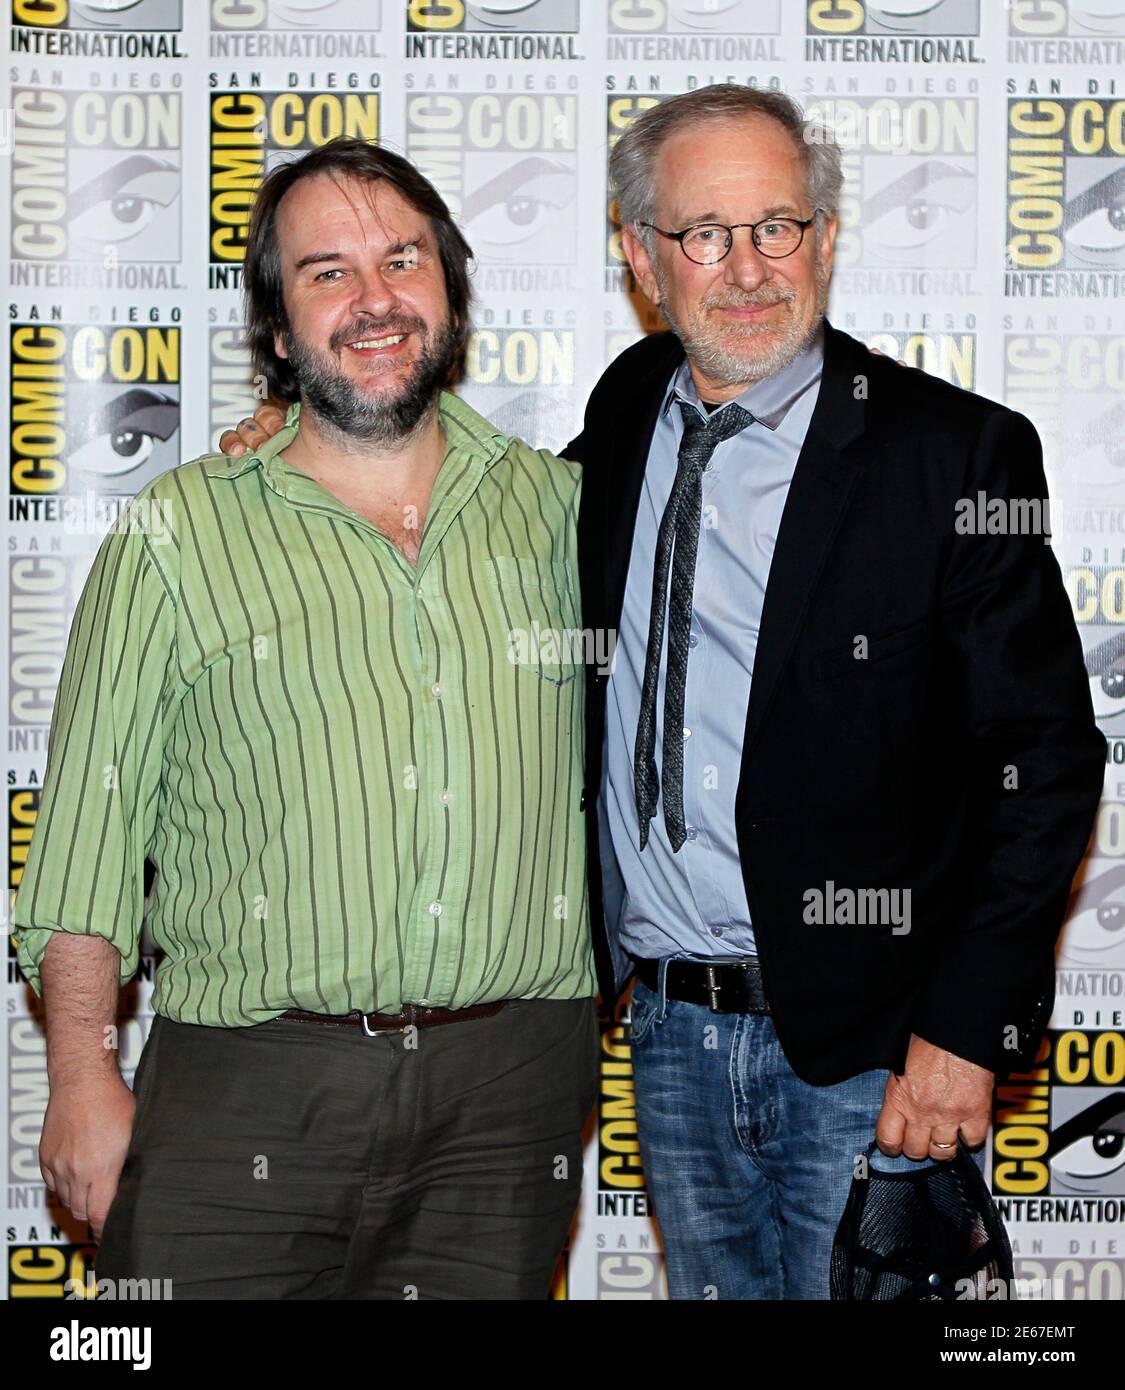 Director Steven Spielberg makes his inaugural appearance at Comic Con with the help of friend and producer Peter Jackson in promotion of their upcoming motion picture 'The Adventures of Tin Tin' at the pop culture event in San Diego, California July 22, 2011.   REUTERS/Mike Blake  (UNITED STATES - Tags: SOCIETY PROFILE ENTERTAINMENT) Stock Photo